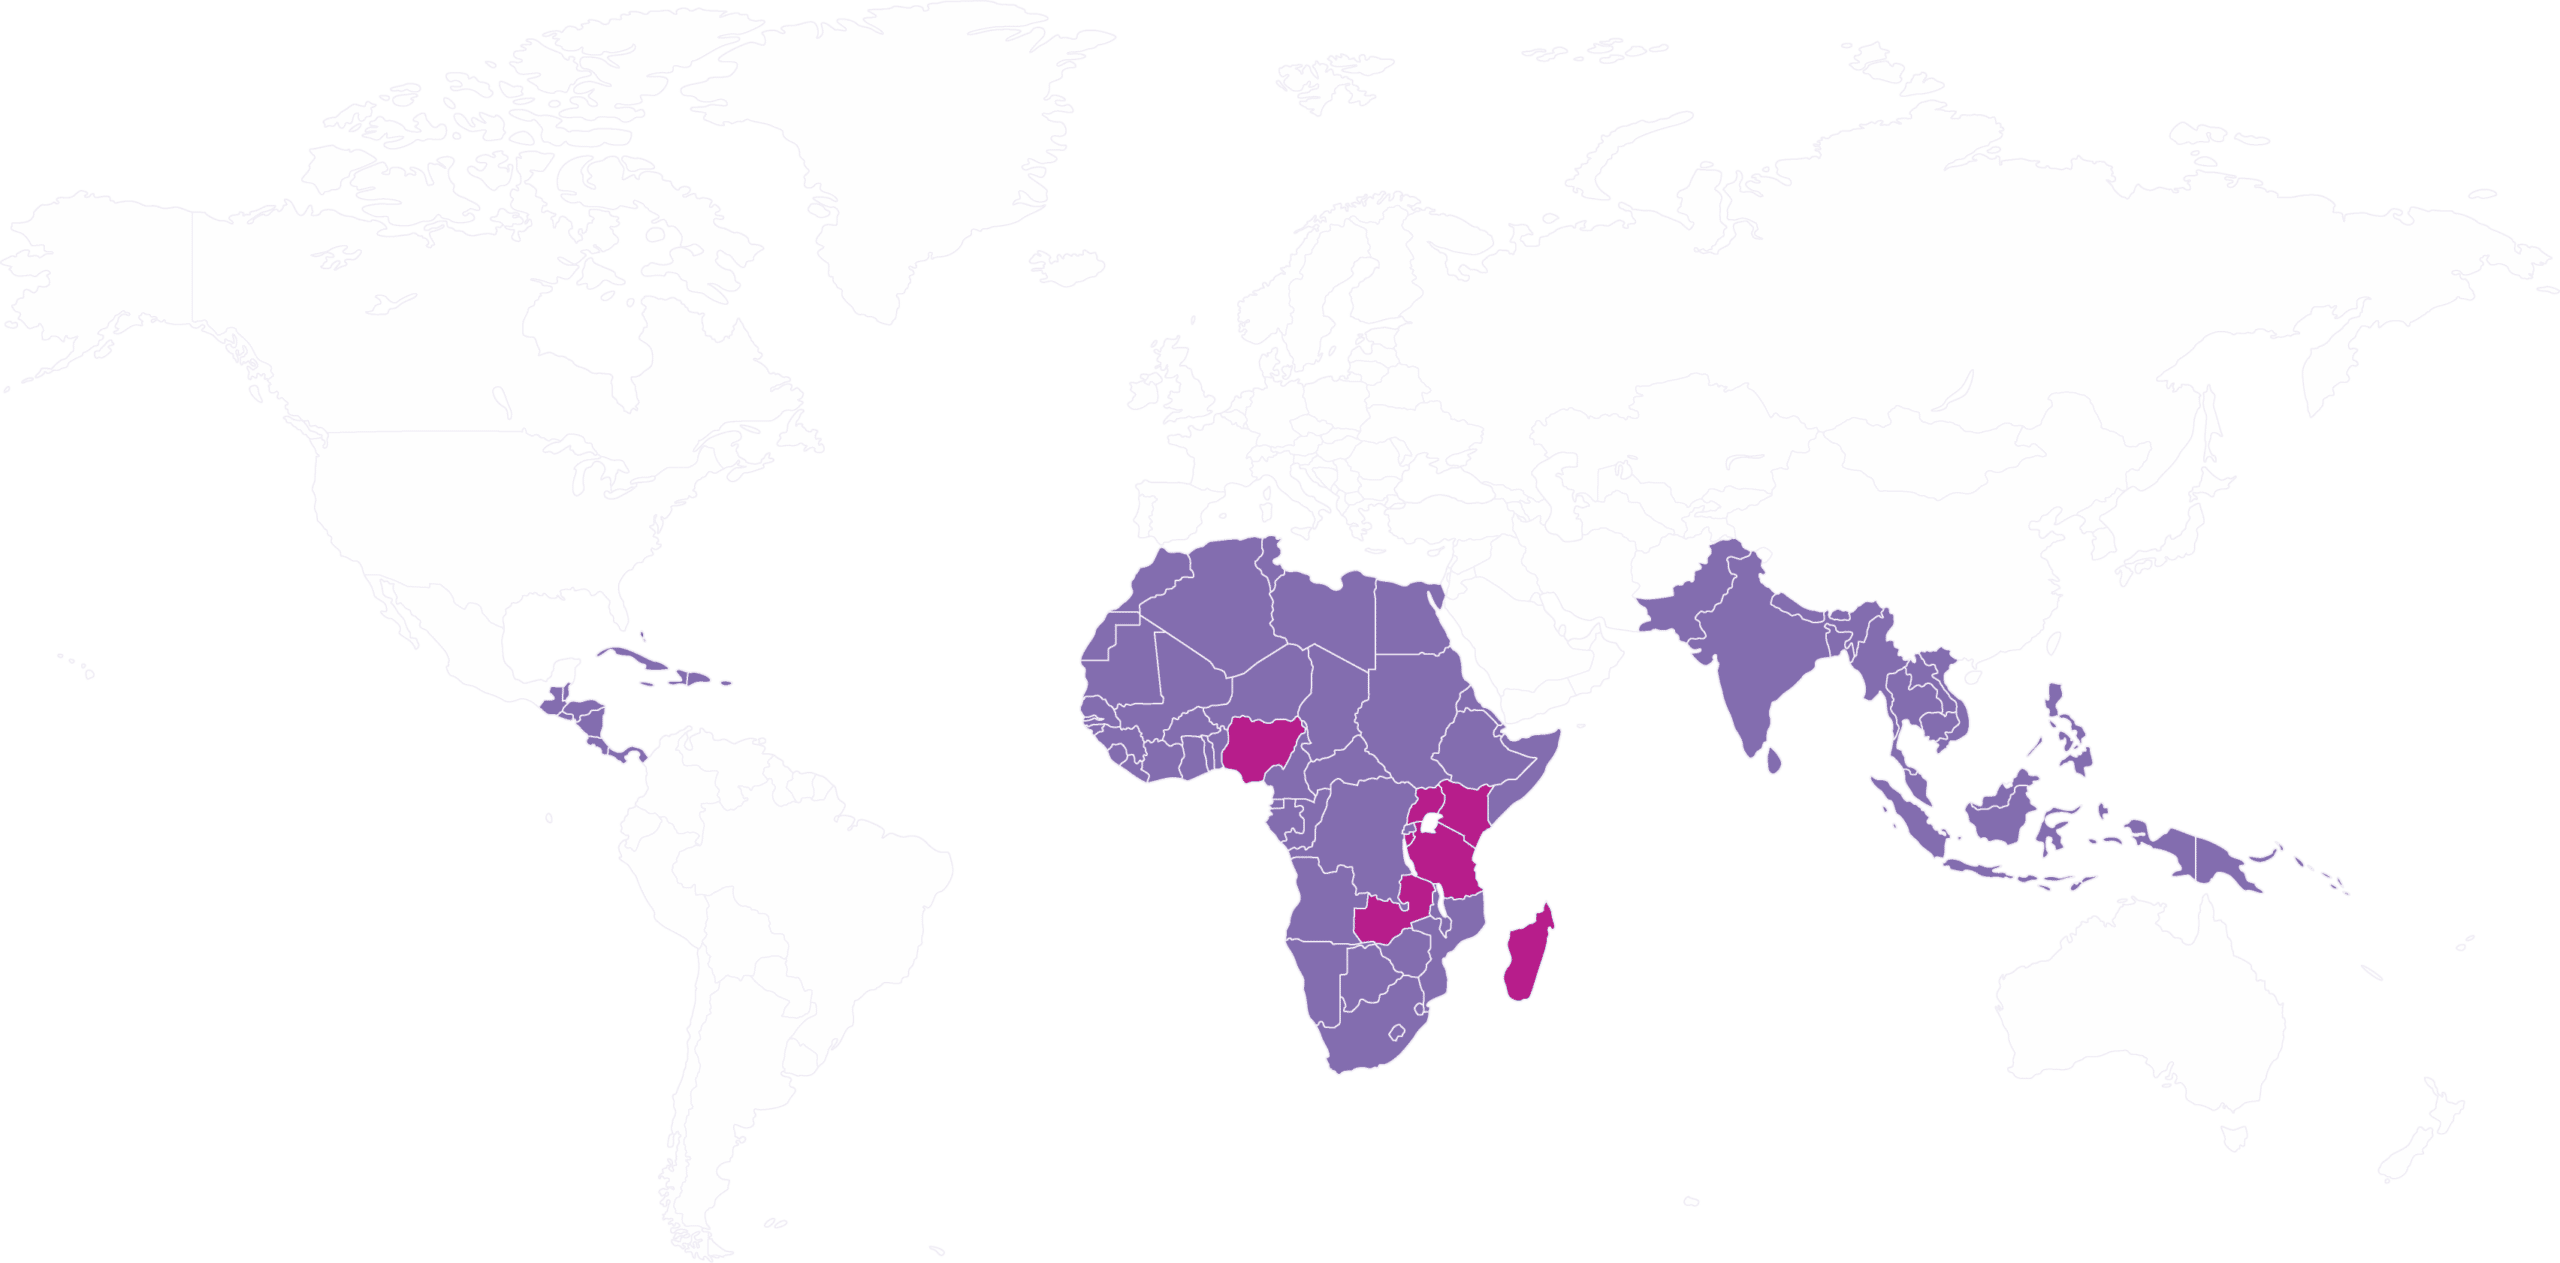 World map with countries in Africa, South and Southeast Asia, and Central America and the Caribbean highlighted in purple and magenta.